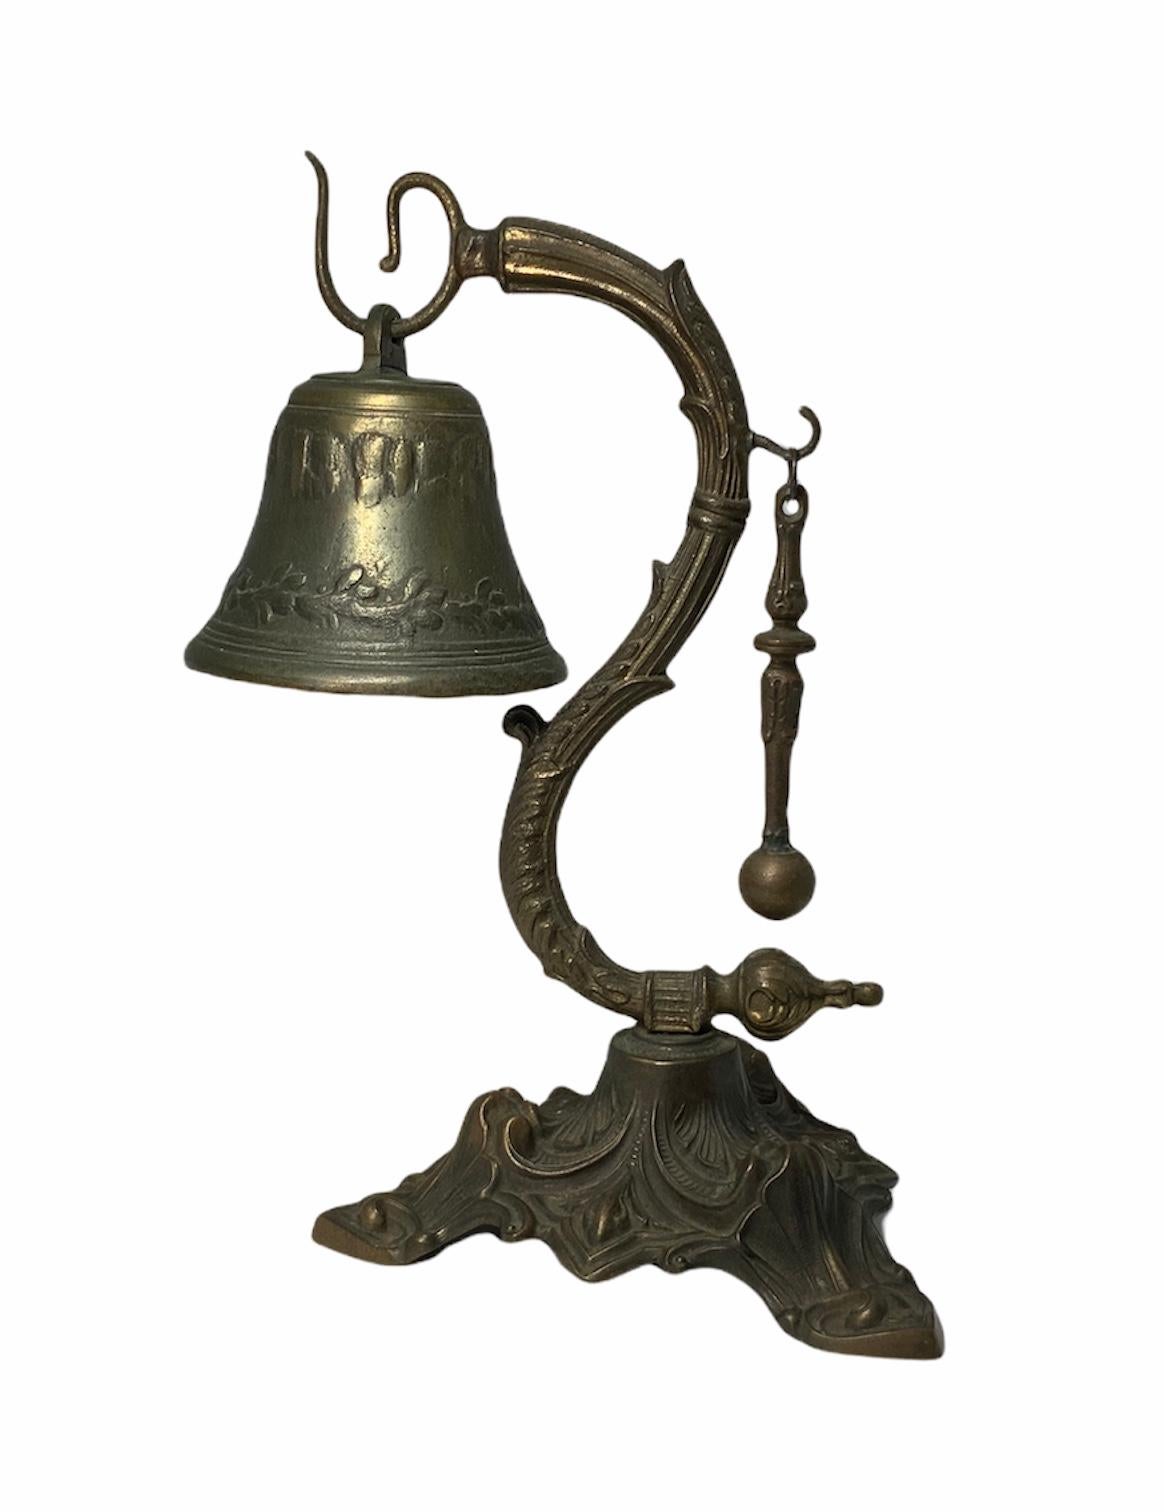 This a bronze color heavy white metal call bell with a stand and a small bell stick. The bell is adorned with some repousse bay leaves branches. It hangs from a hook in a stand made of a serpentine shaped acanthus leaves intertwined branches. This